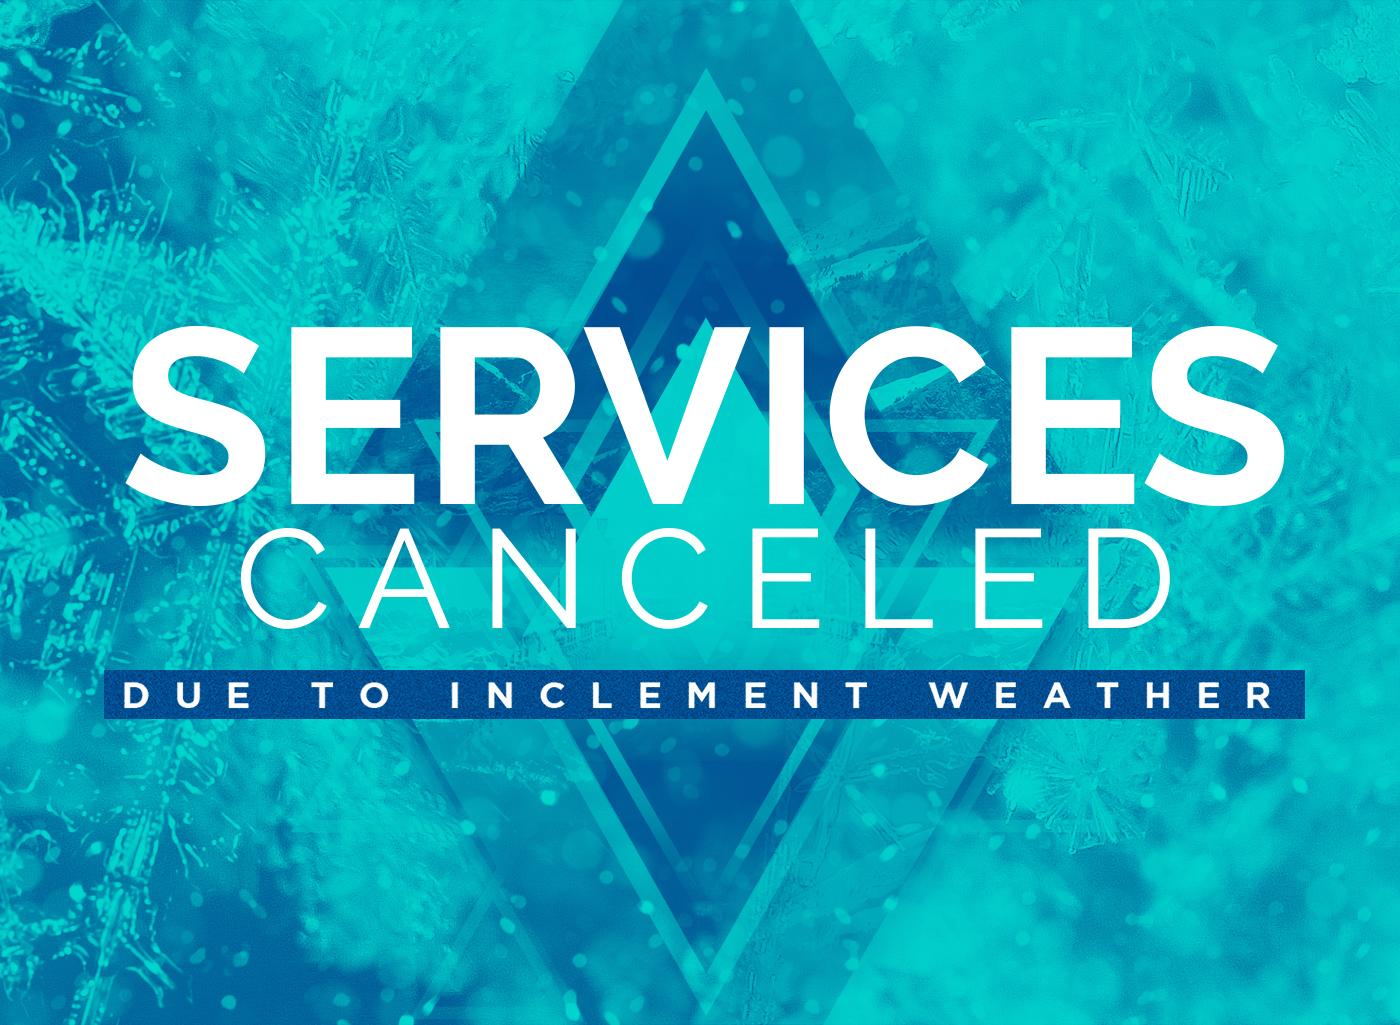 Services canceled notice